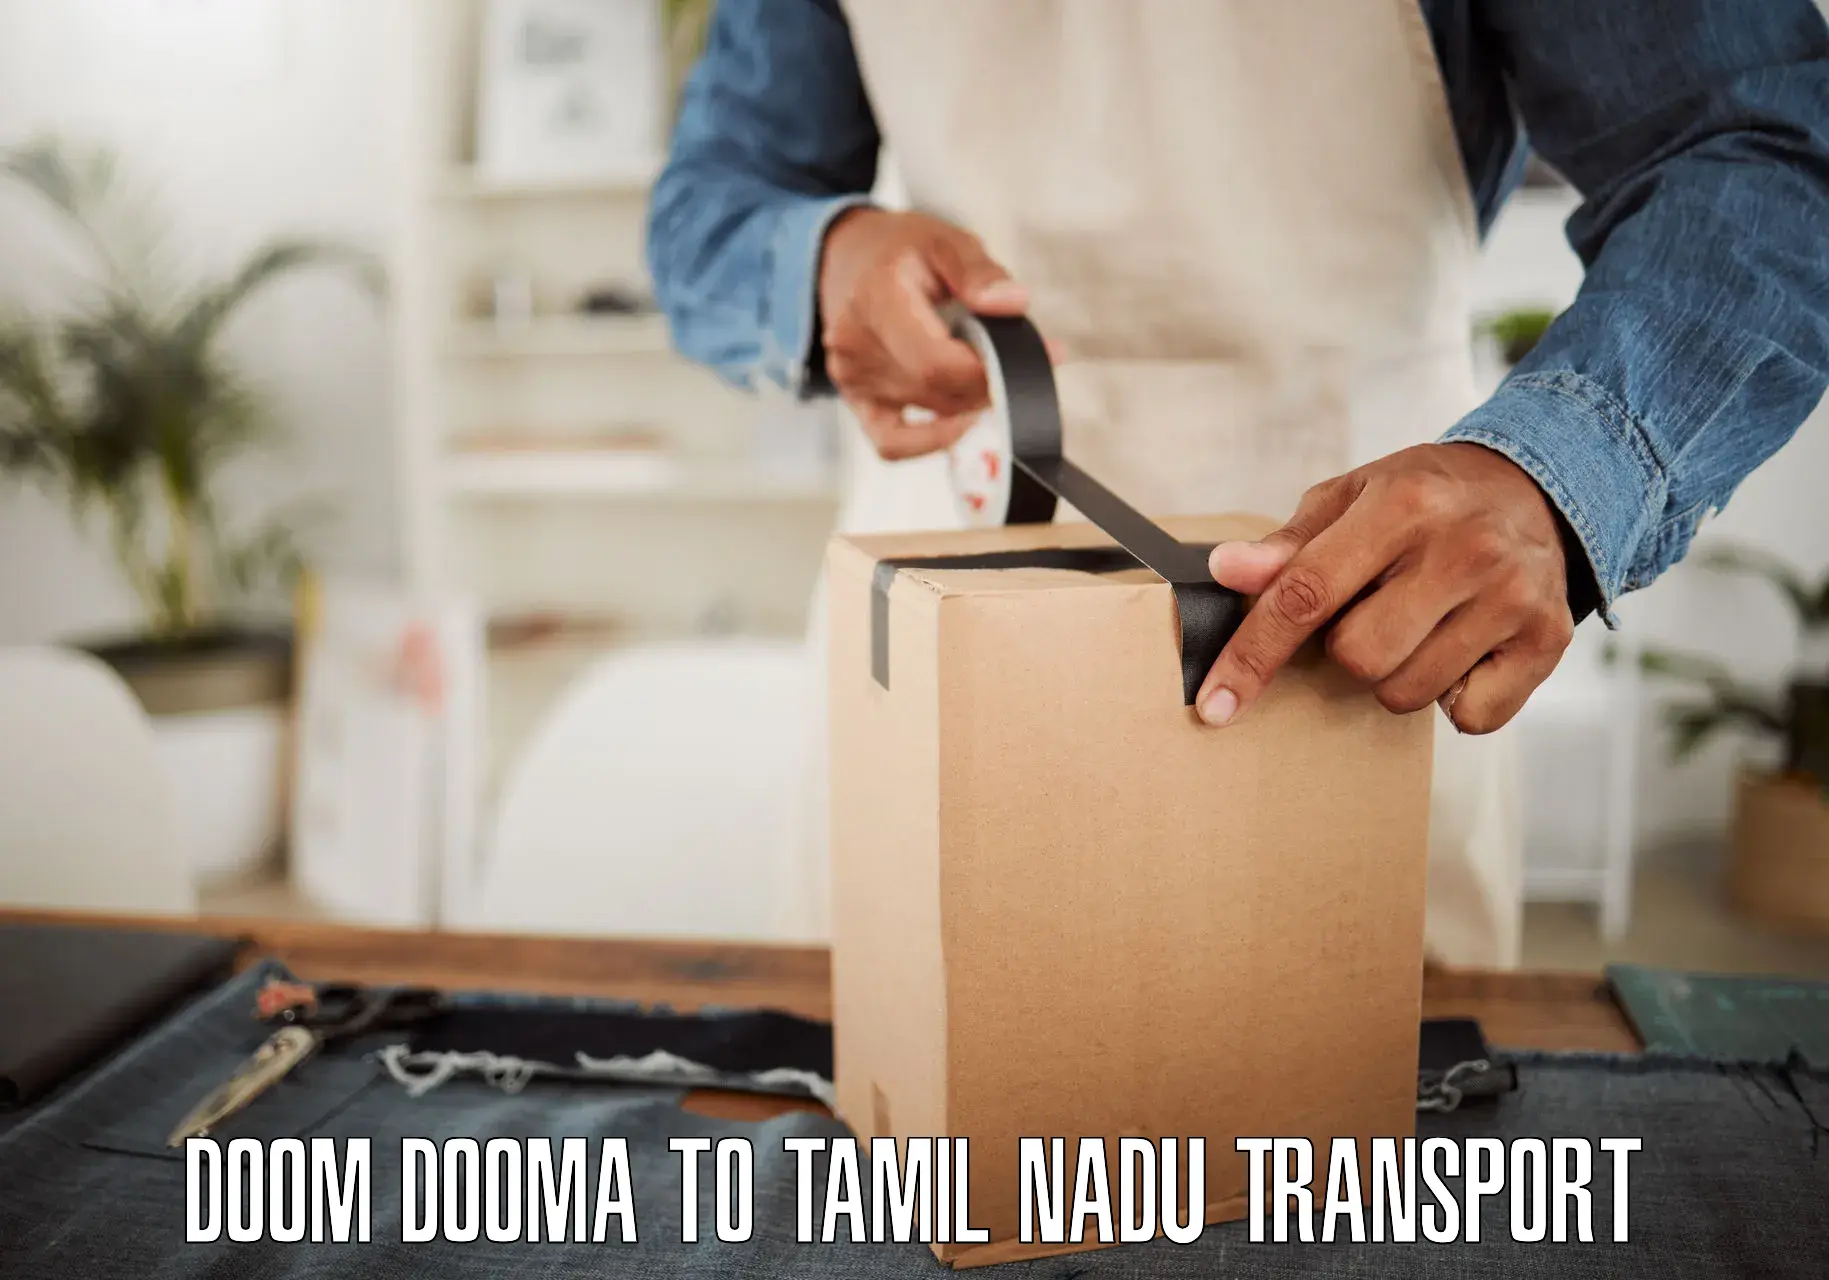 India truck logistics services in Doom Dooma to Bharath Institute of Higher Education and Research Chennai